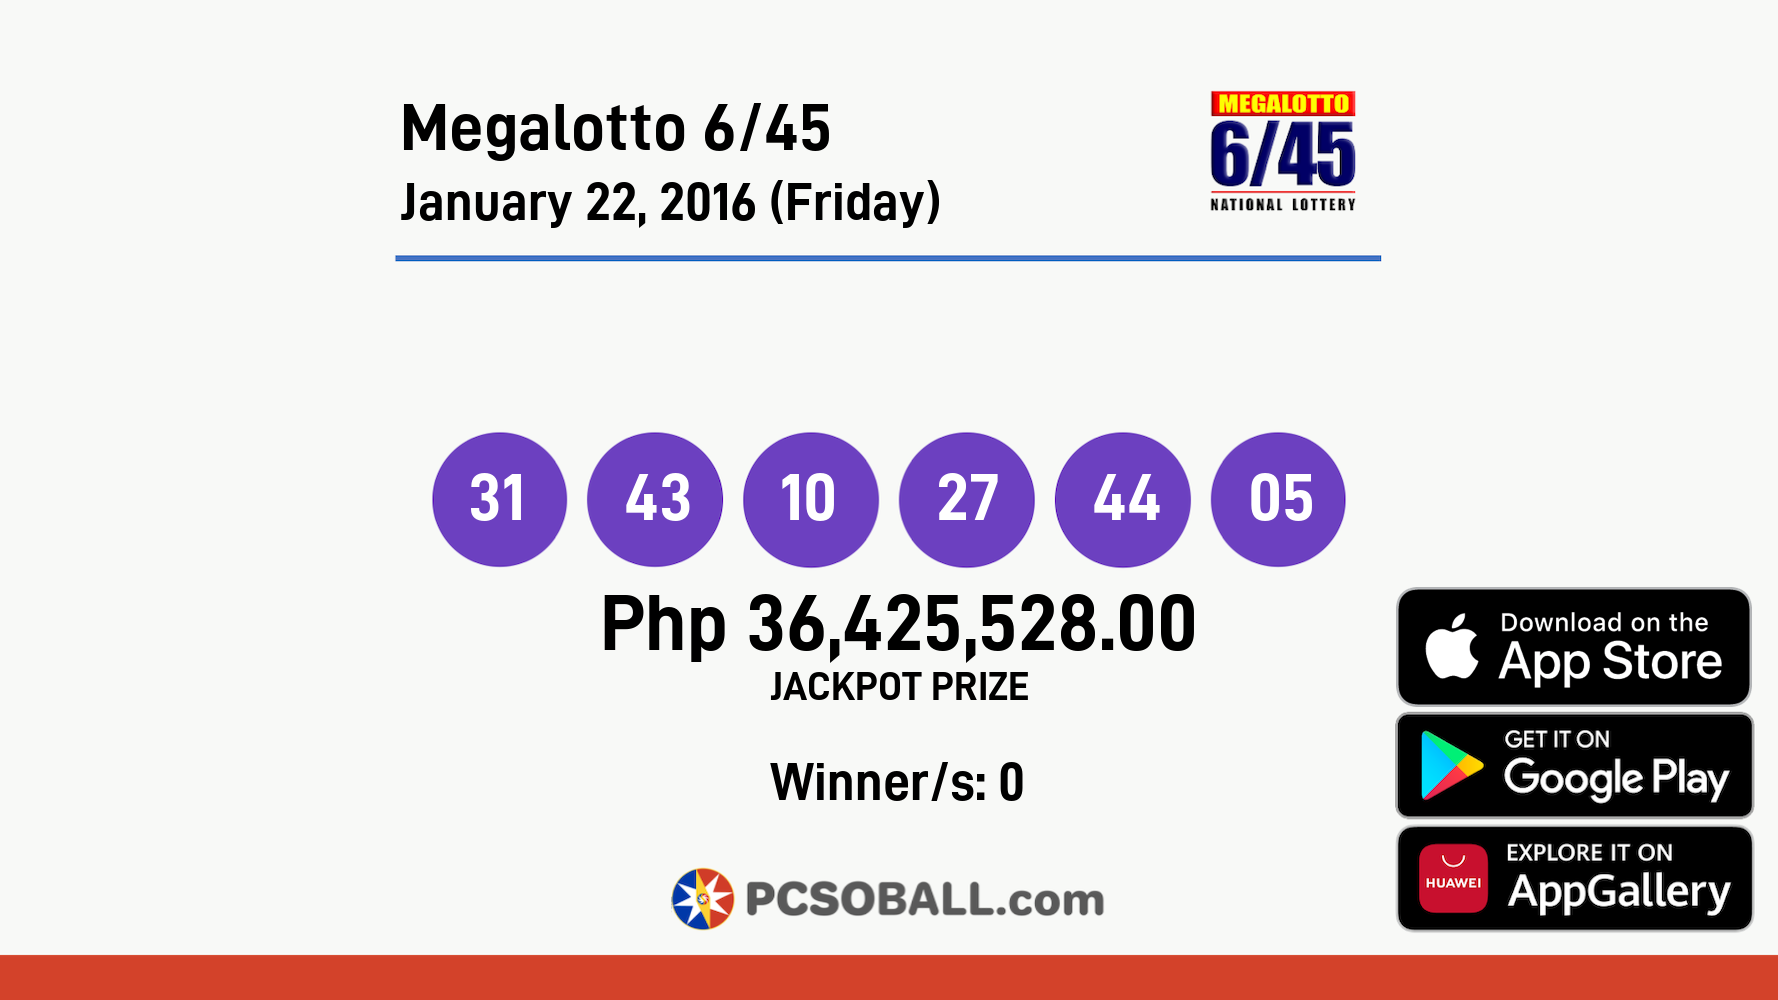 Megalotto 6/45 January 22, 2016 (Friday) Result